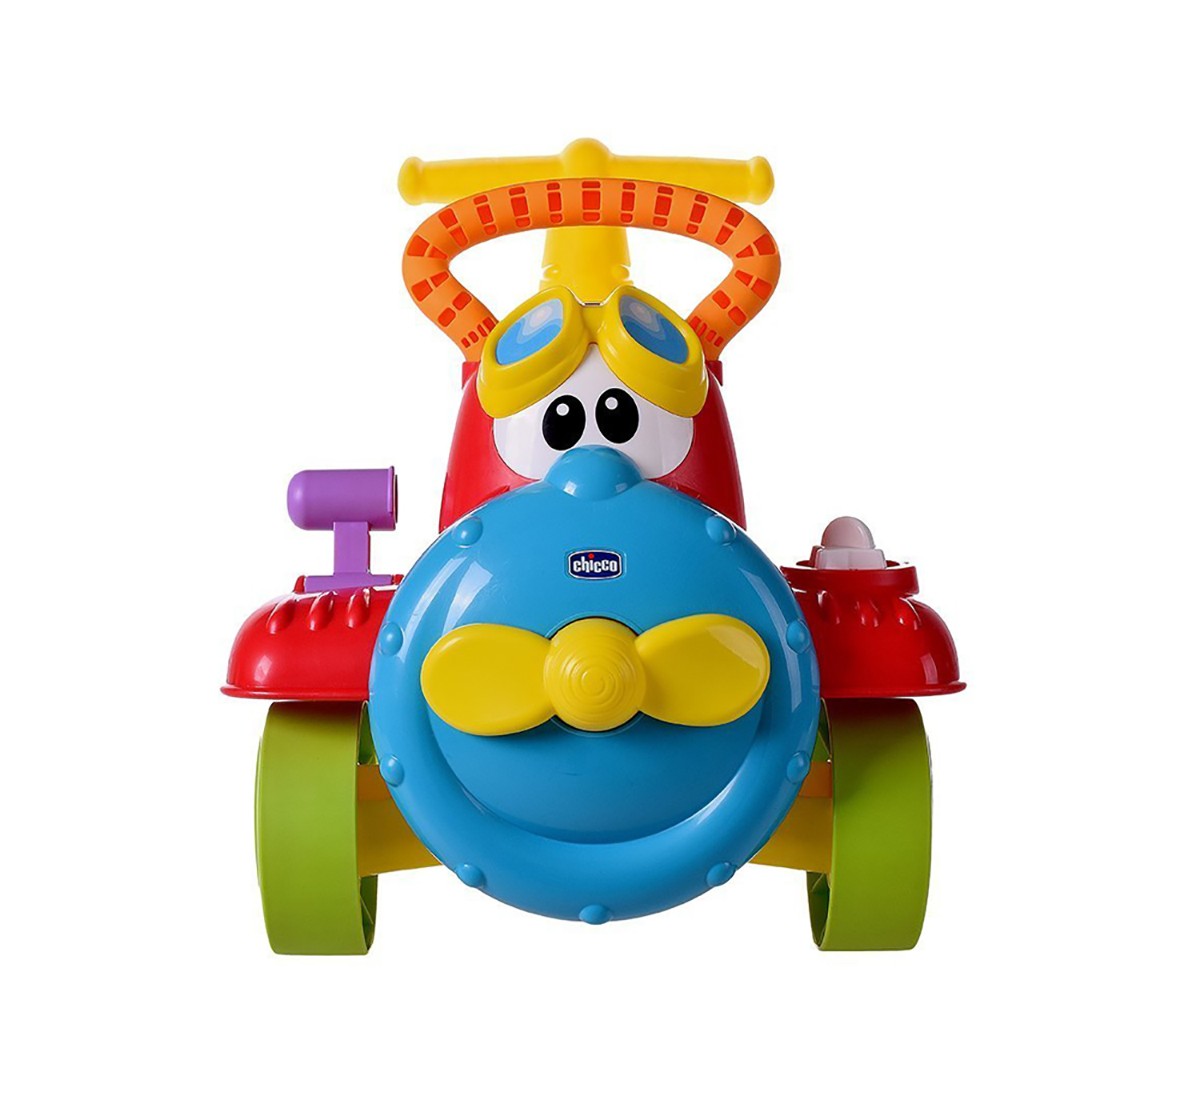 Chicco Charlie Sky Rider First Rideon for Kids age 12M+ 